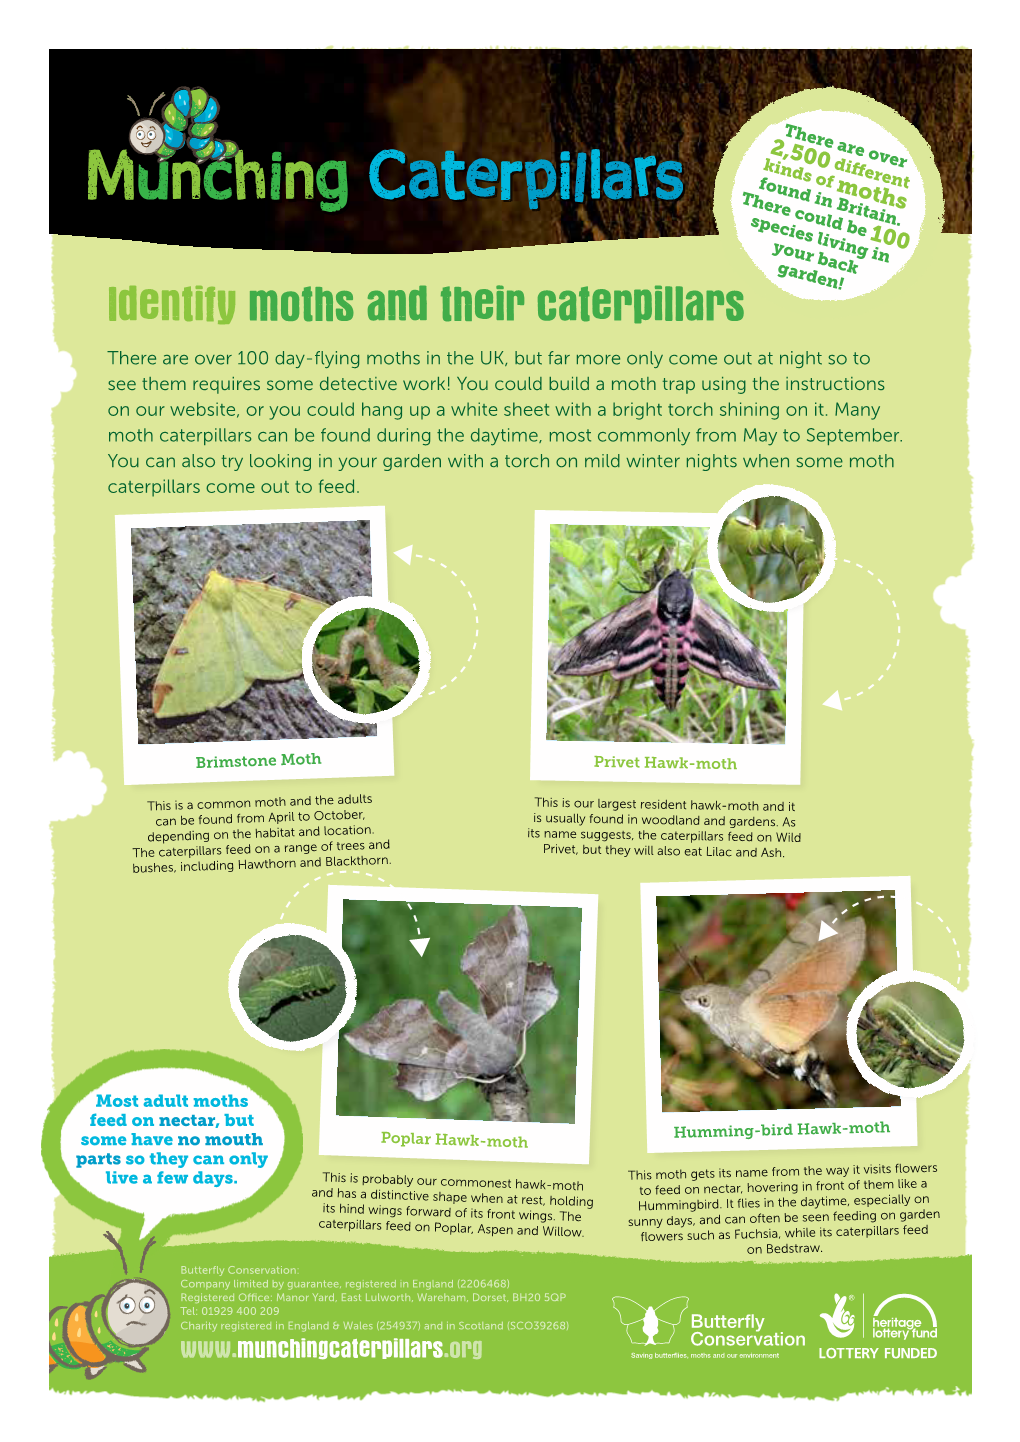 Identify Moths and Their Caterpillars